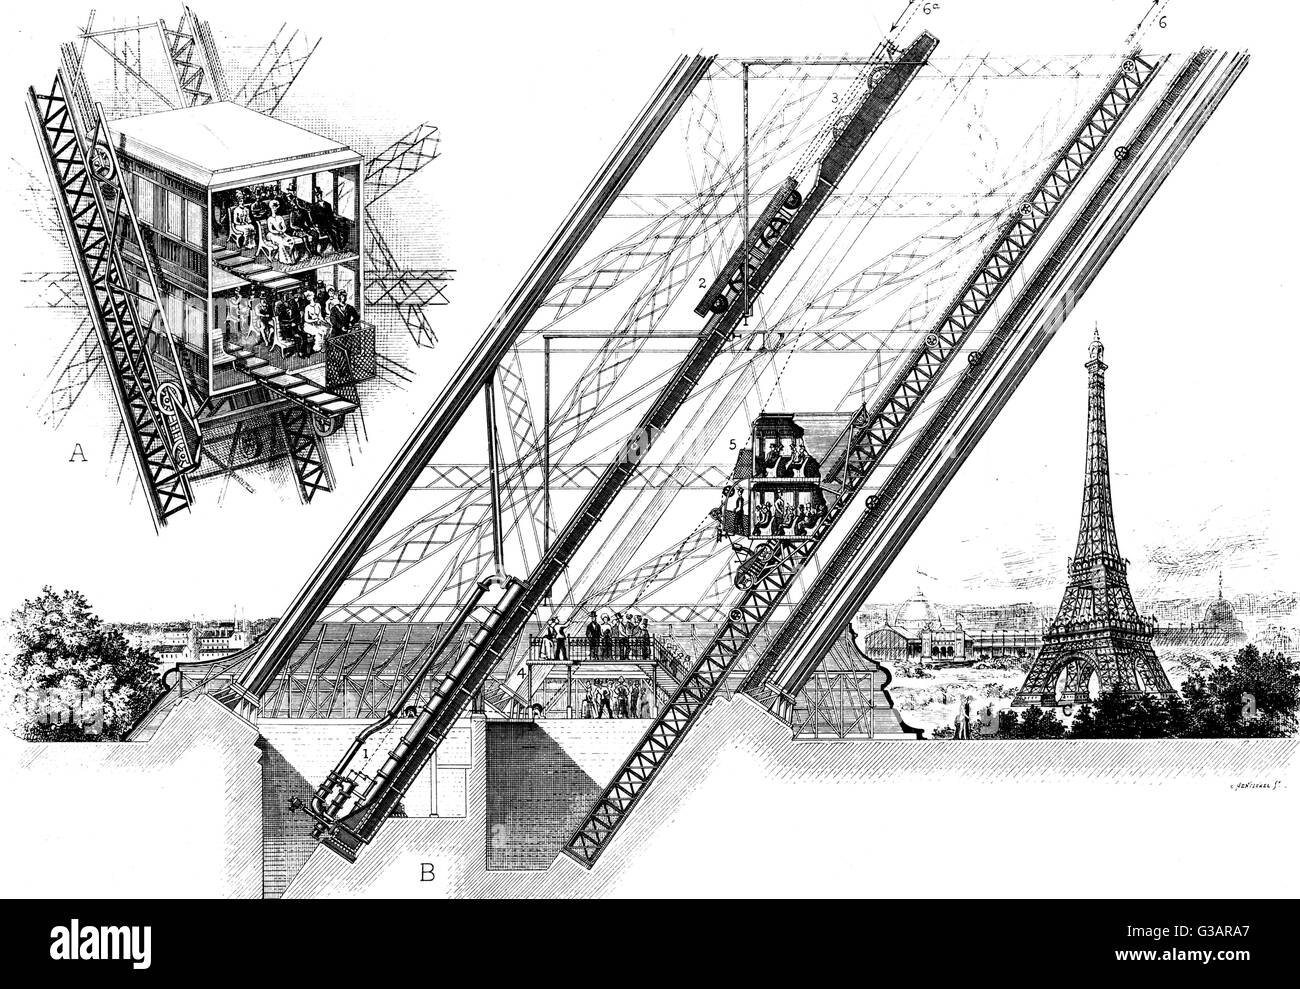 Paris, France - La Tour Eiffel, Otis Elevators.  The Otis elevator in the Eiffel Tower, built by the American Elevator Company.  first view shows a car filled with fifty passengers with the front removed to show the interior.  Figure B shows one leg of th Stock Photo